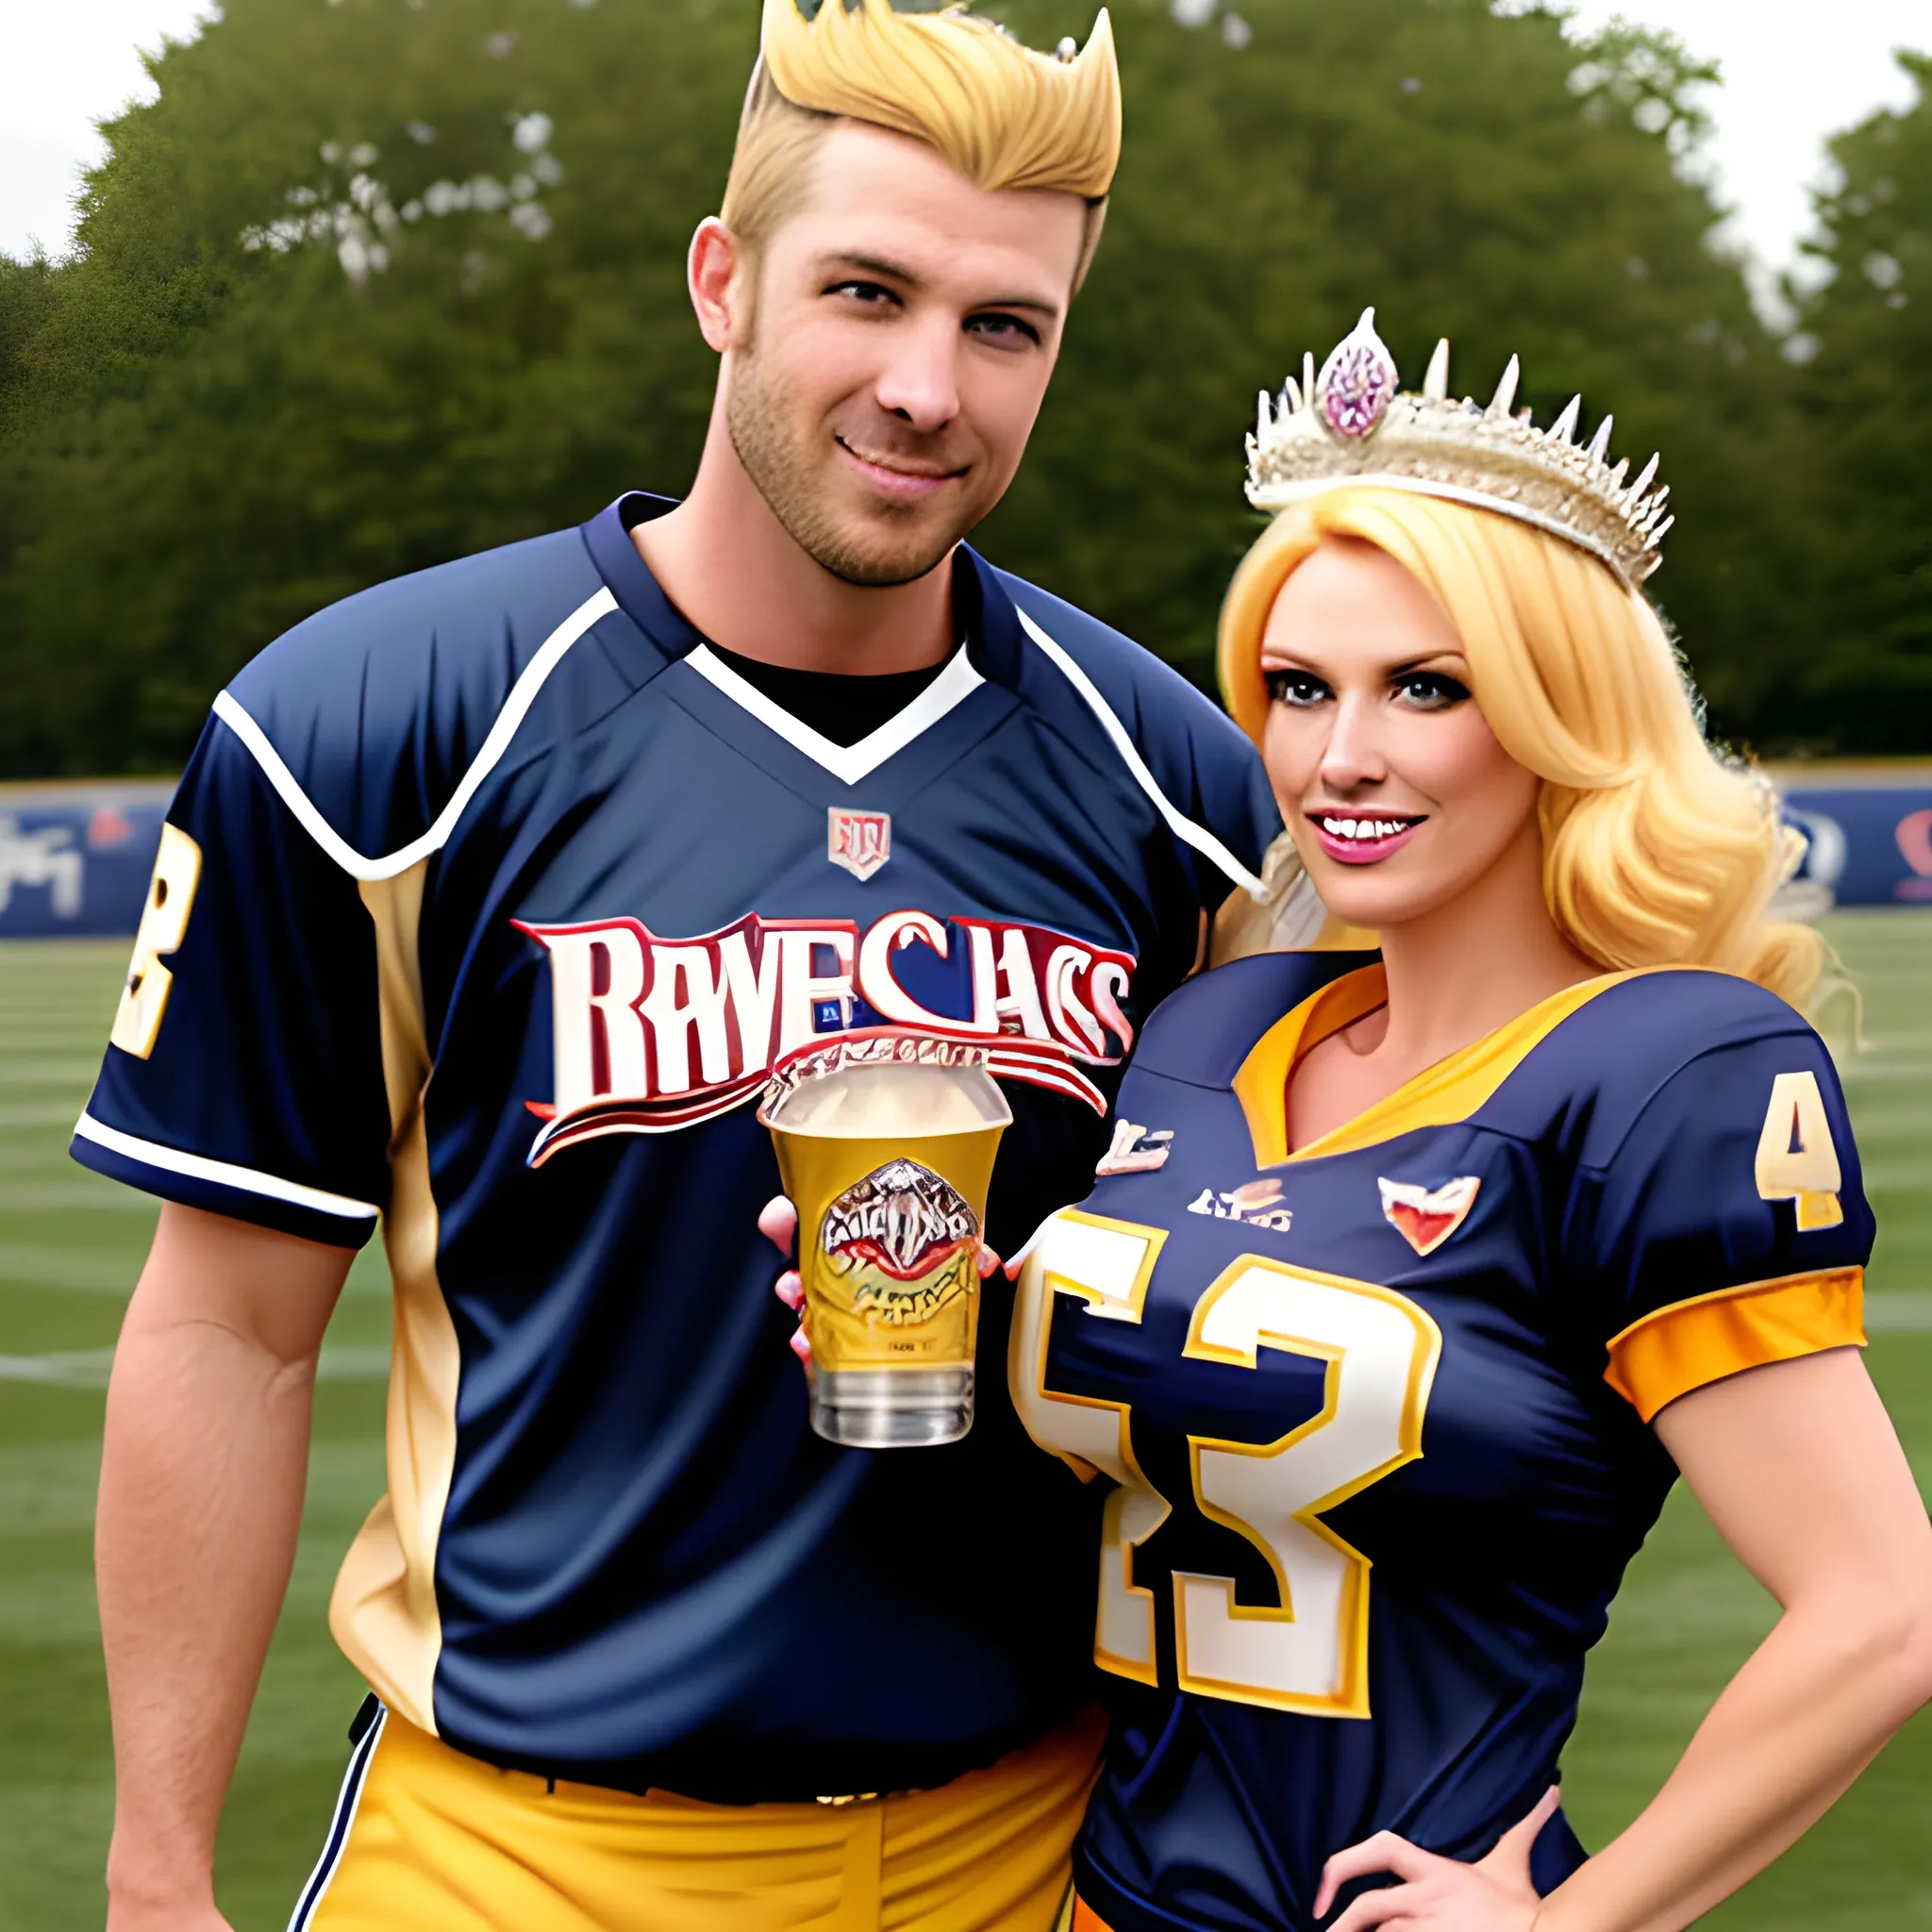 Attractive, cute, sexy Princess peach blonde girl with a crown and an american football in a navy blue busch light beer jersey. The image should be sultry with the girl leaning in towards the camera